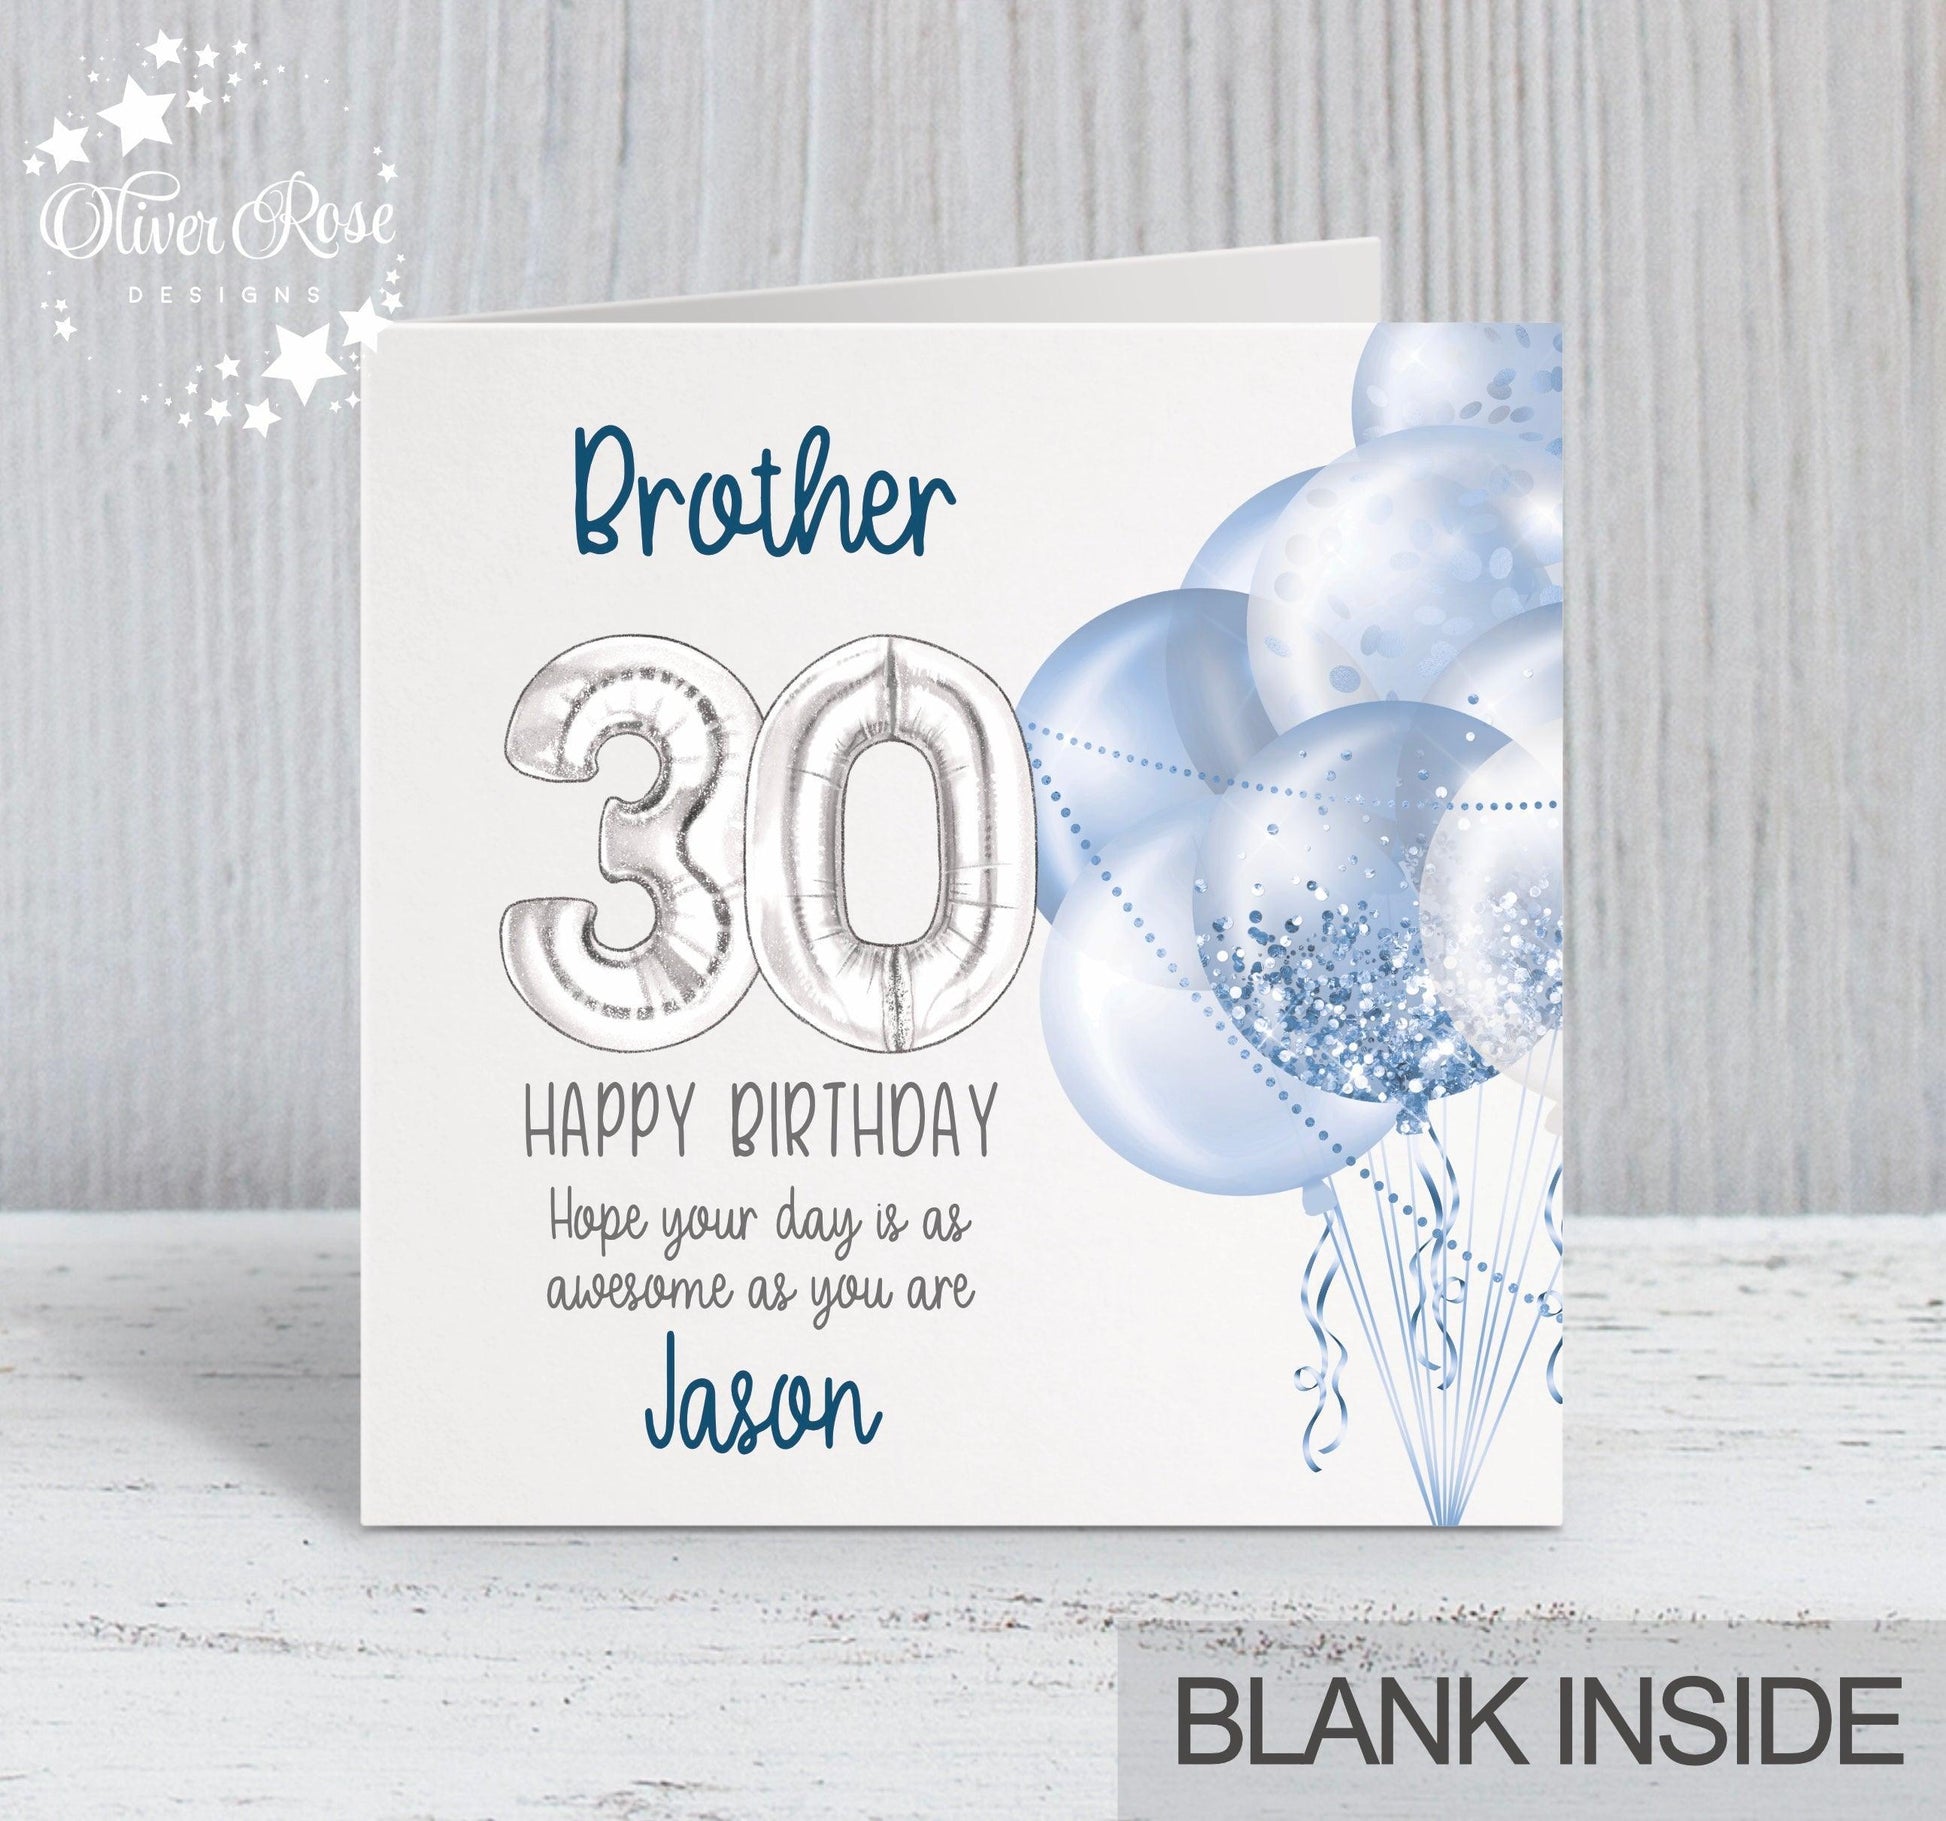 30th Birthday Card Brother, Blue & Silver Balloons, Personalised with name, Happy Birthday, Hope your day is as awesome as you are! 5.75" square Blank Inside